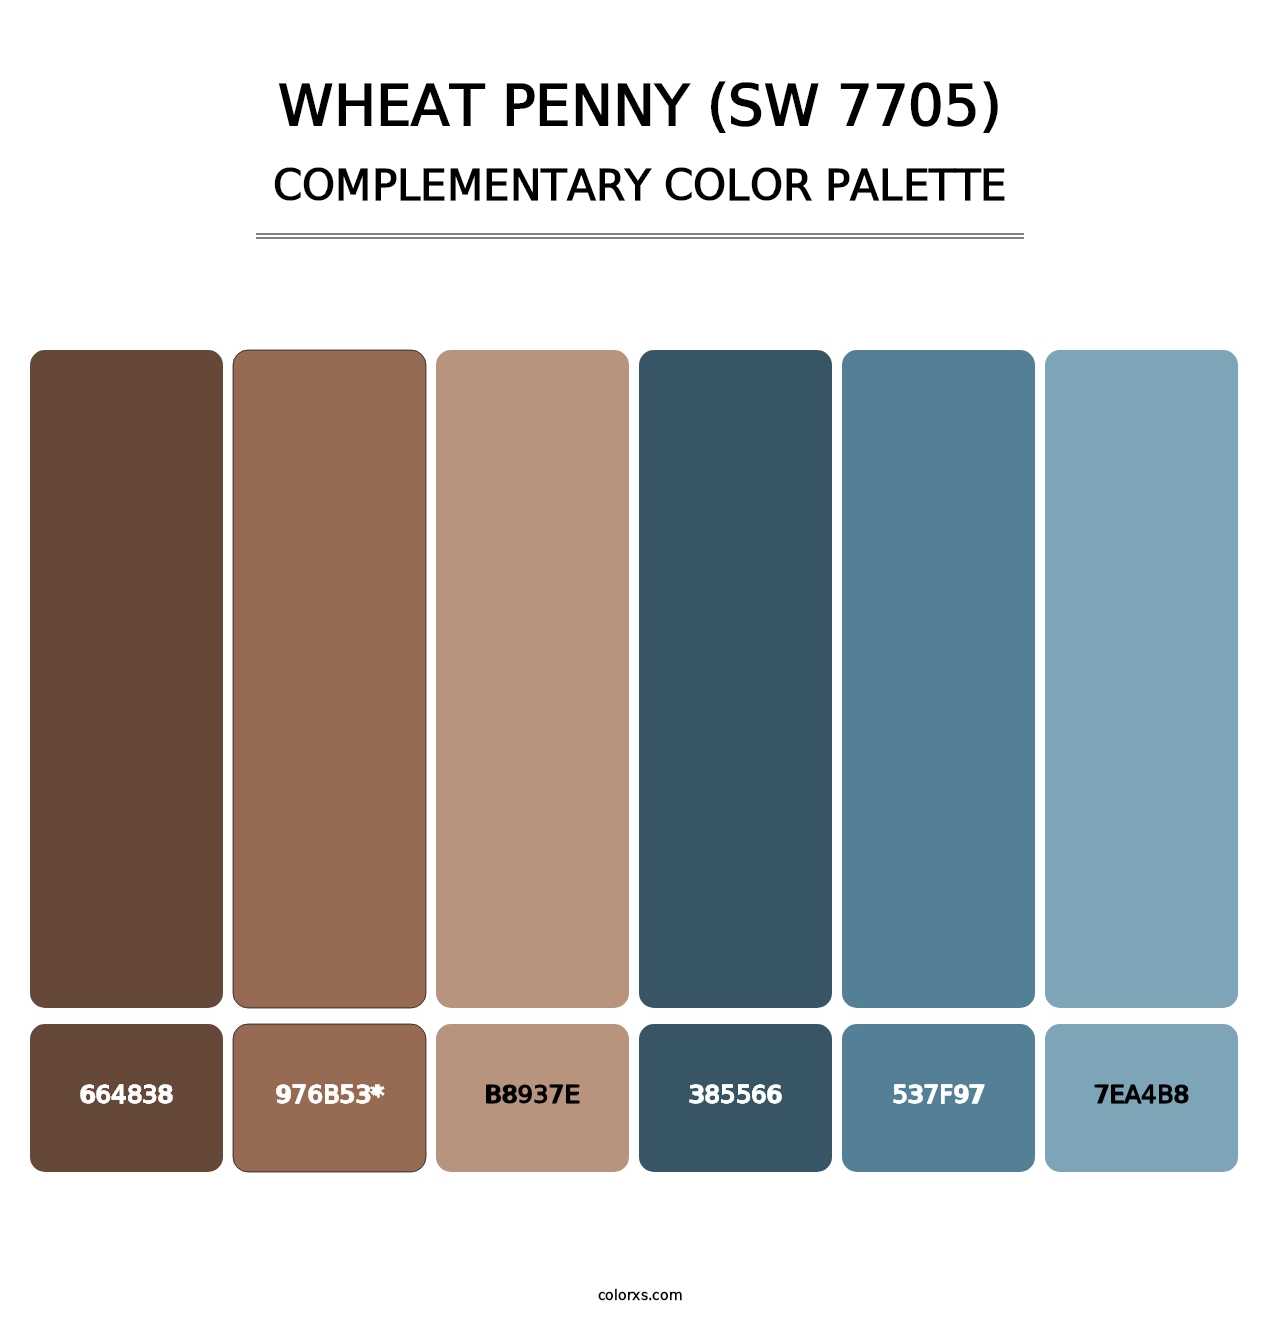 Wheat Penny (SW 7705) - Complementary Color Palette